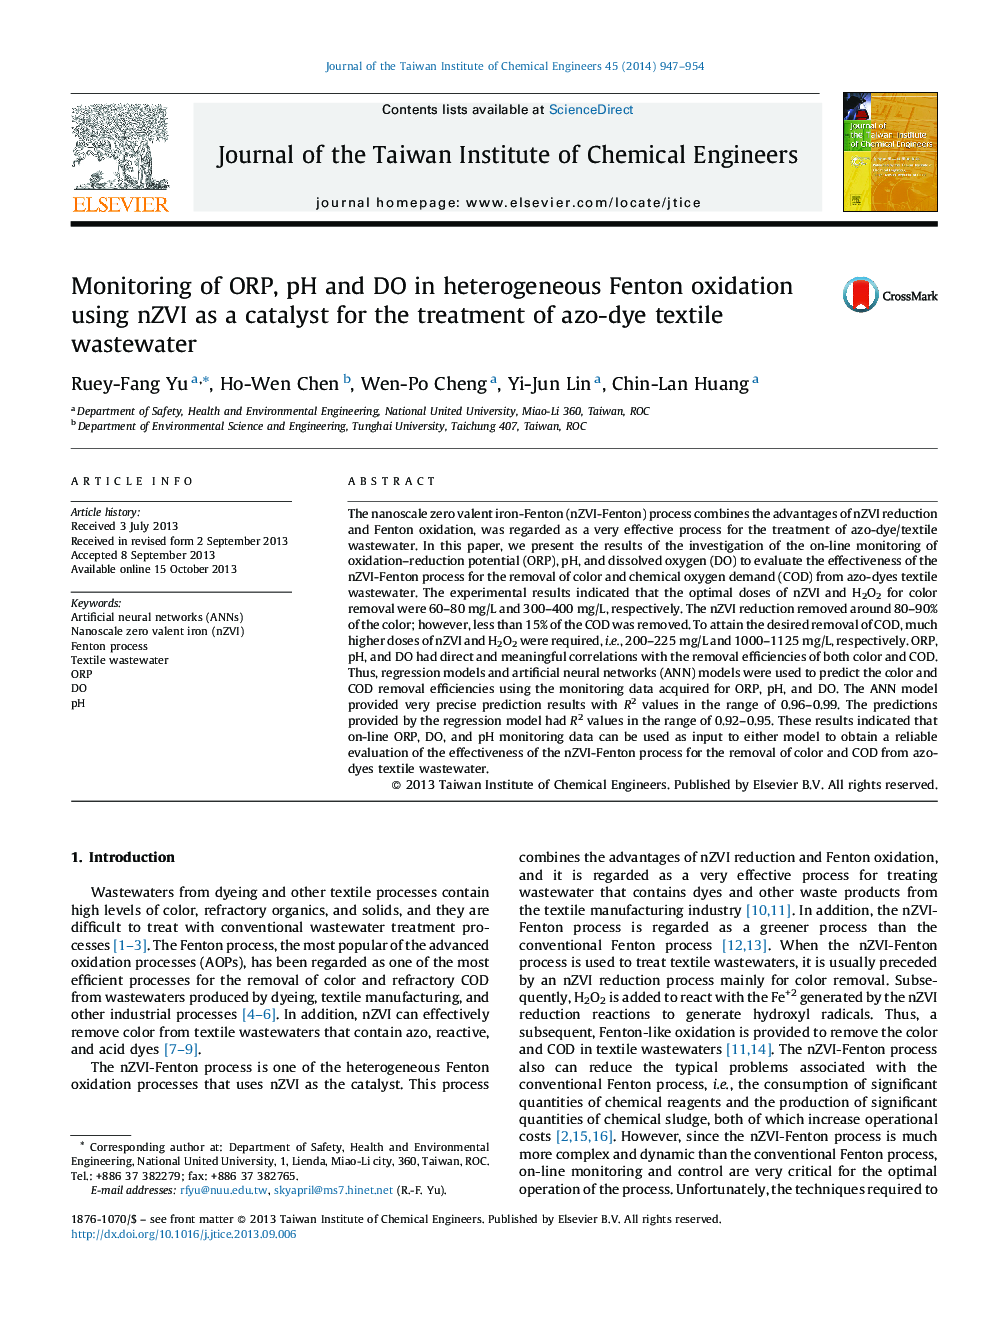 Monitoring of ORP, pH and DO in heterogeneous Fenton oxidation using nZVI as a catalyst for the treatment of azo-dye textile wastewater